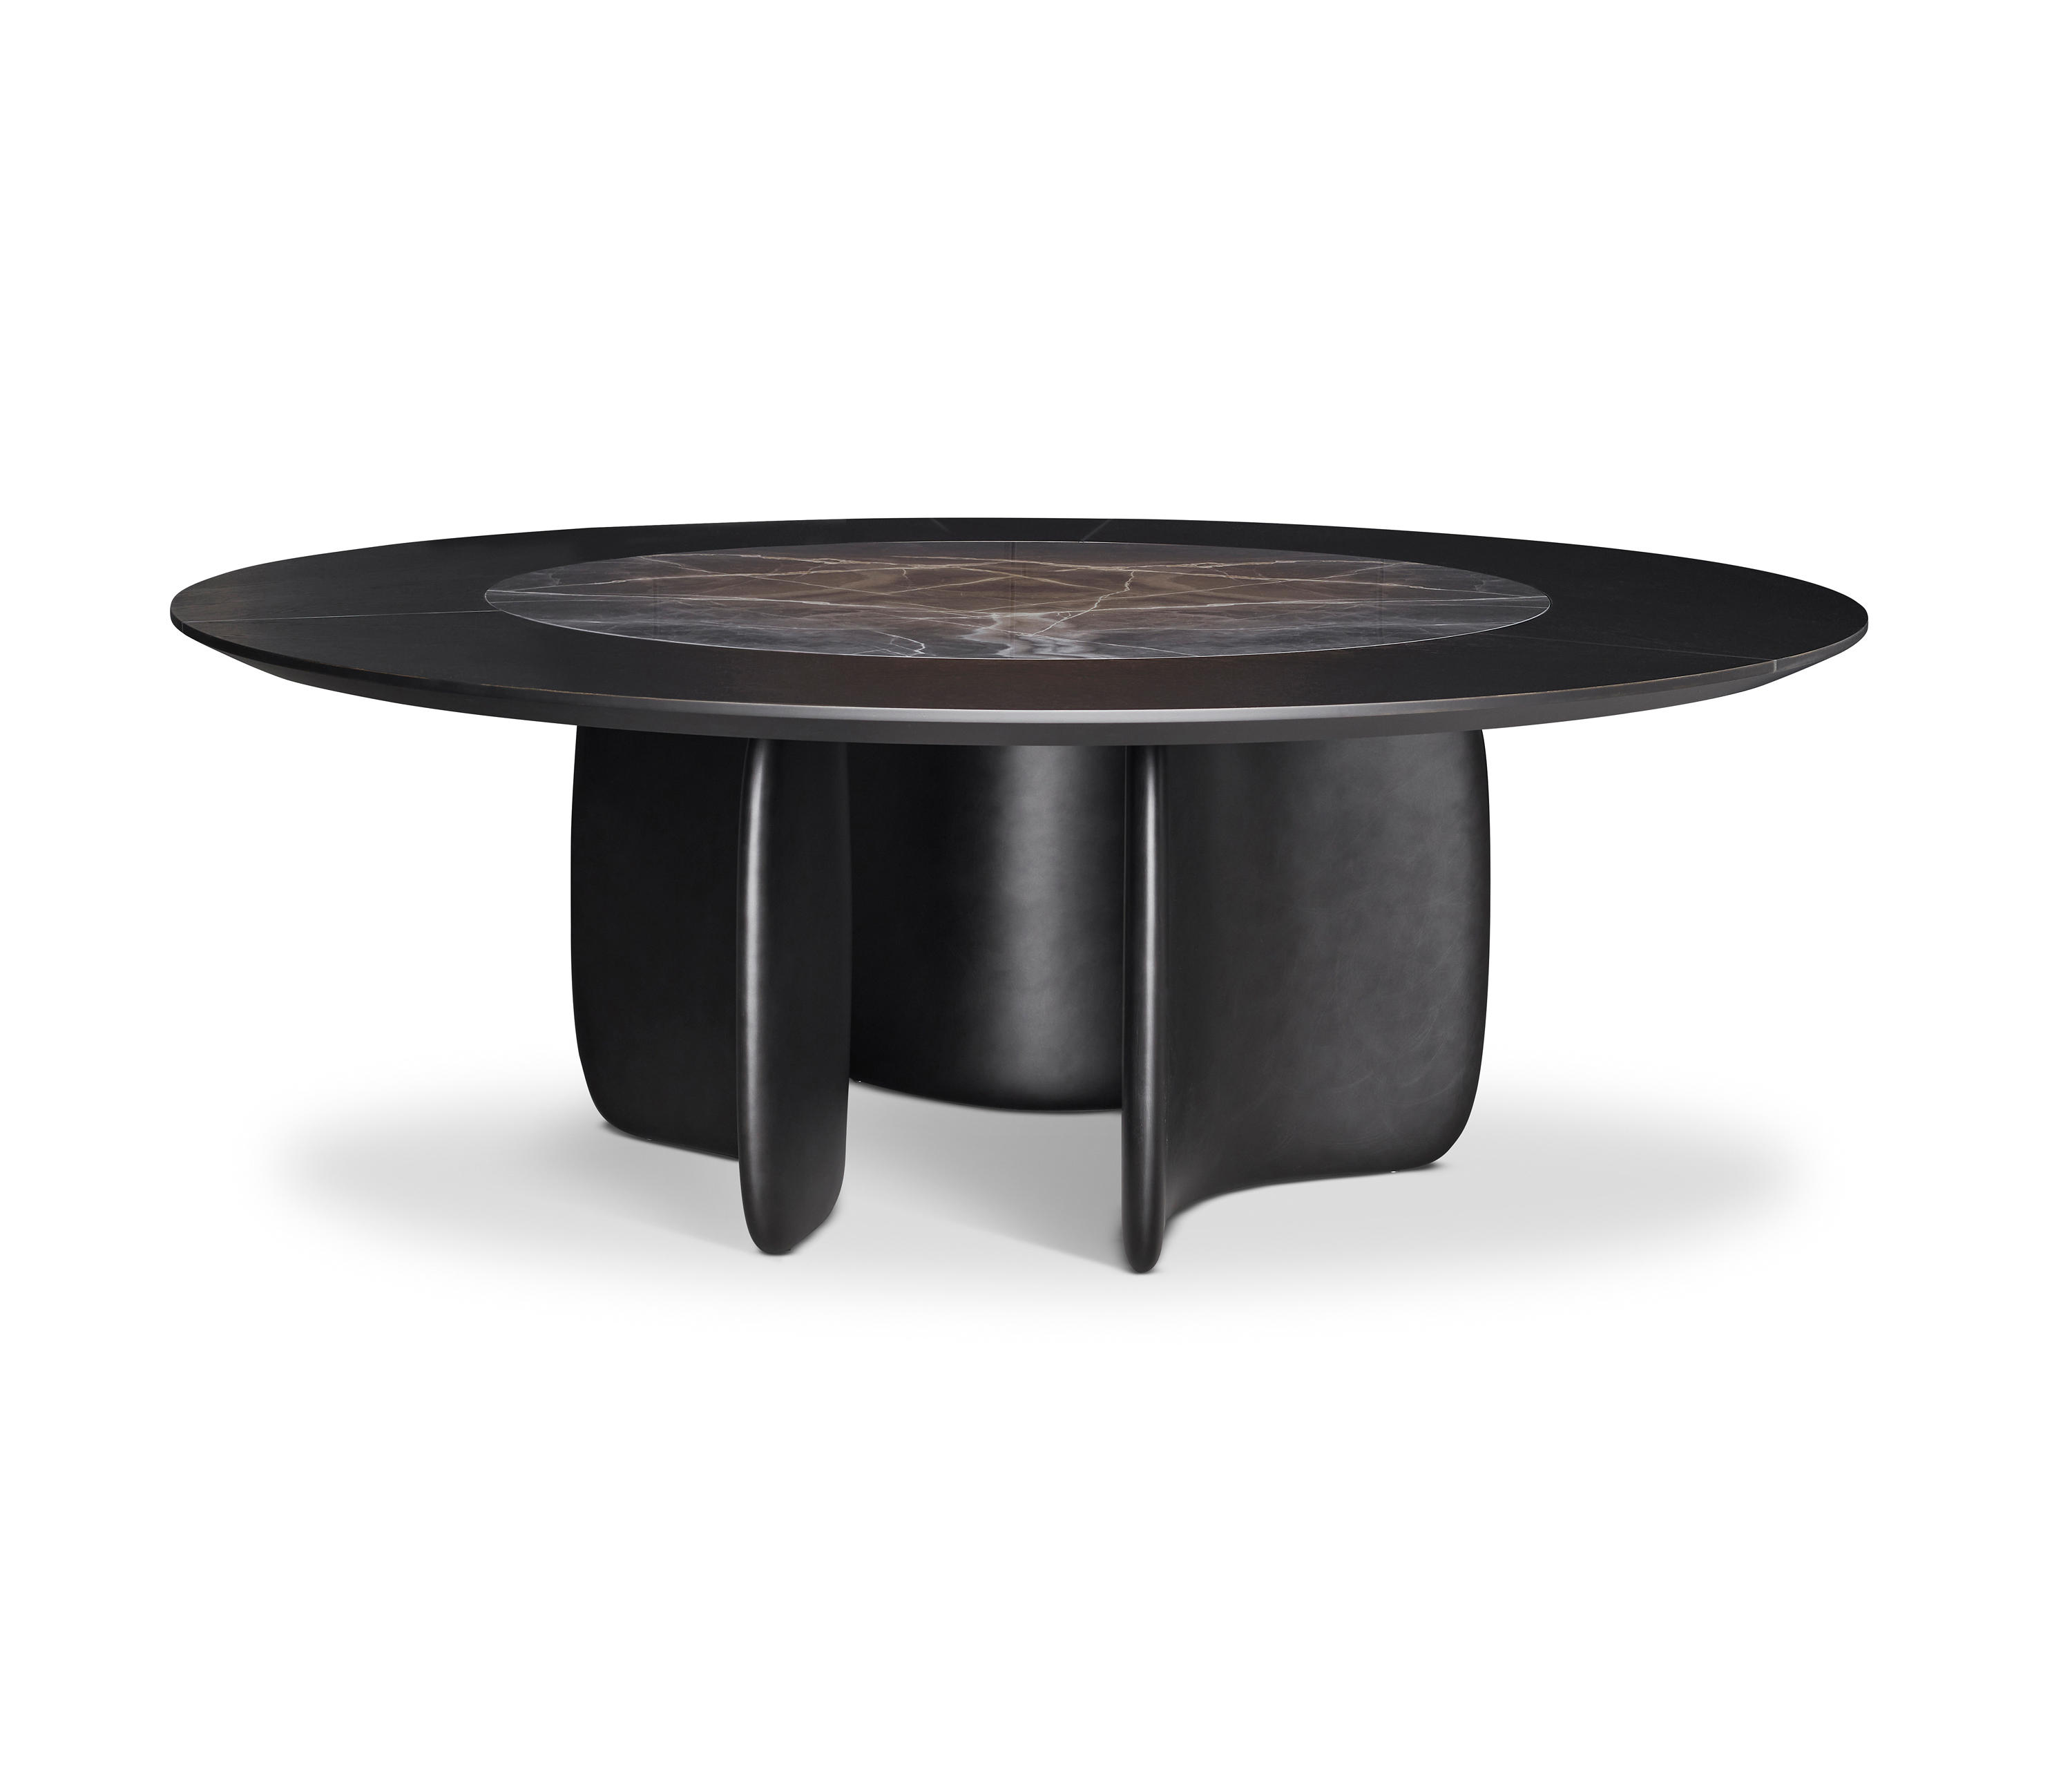 MELLOW ST - Dining tables from Bonaldo | Architonic